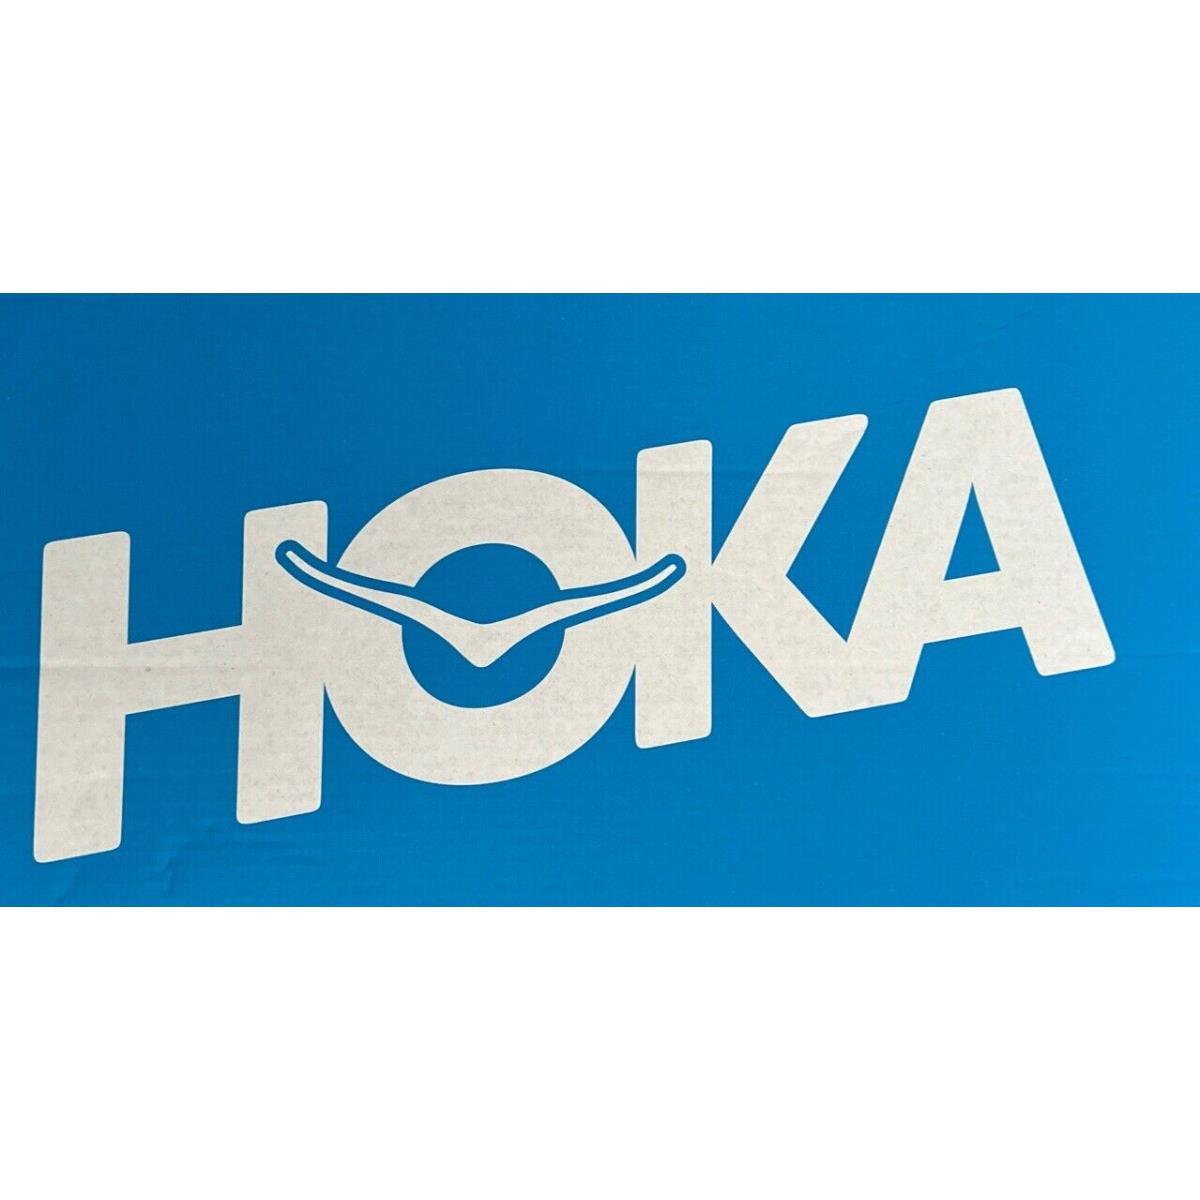 Hoka One One Women`s Carbon X 3 Running Sneaker Shoes Size 7 B M US